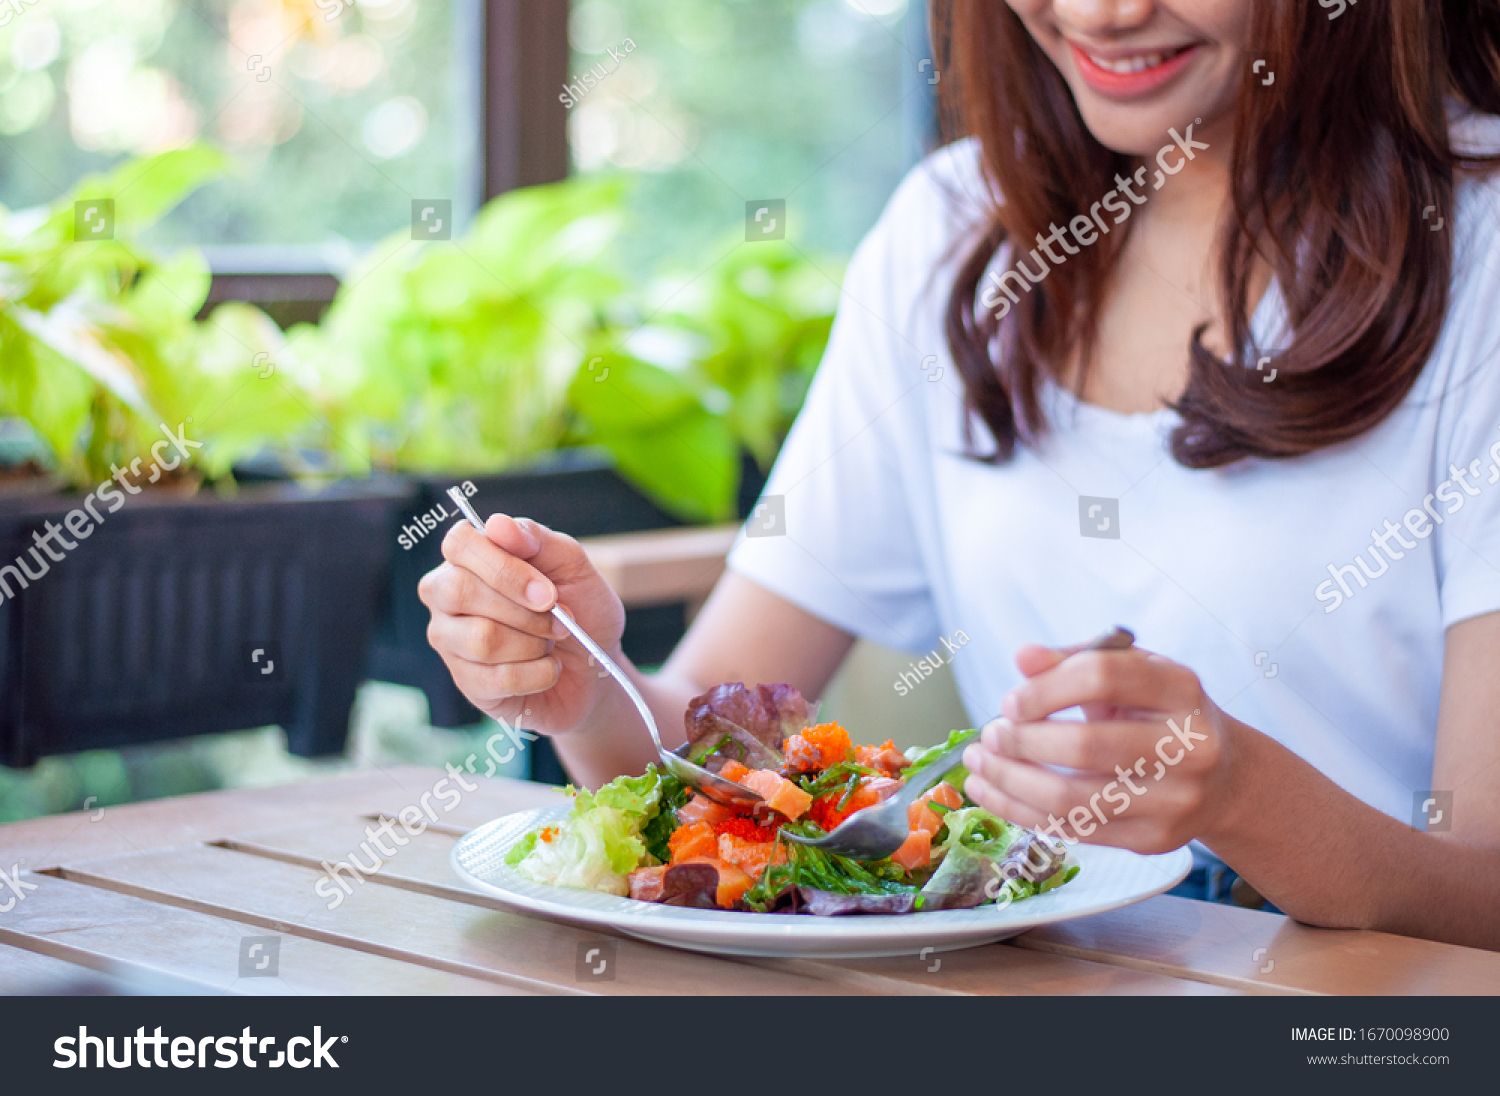 The smiling woman enjoys eating a salmon salad. To lose weight and diet, eat foods that are beneficial to the body. Weight loss concept. #1670098900